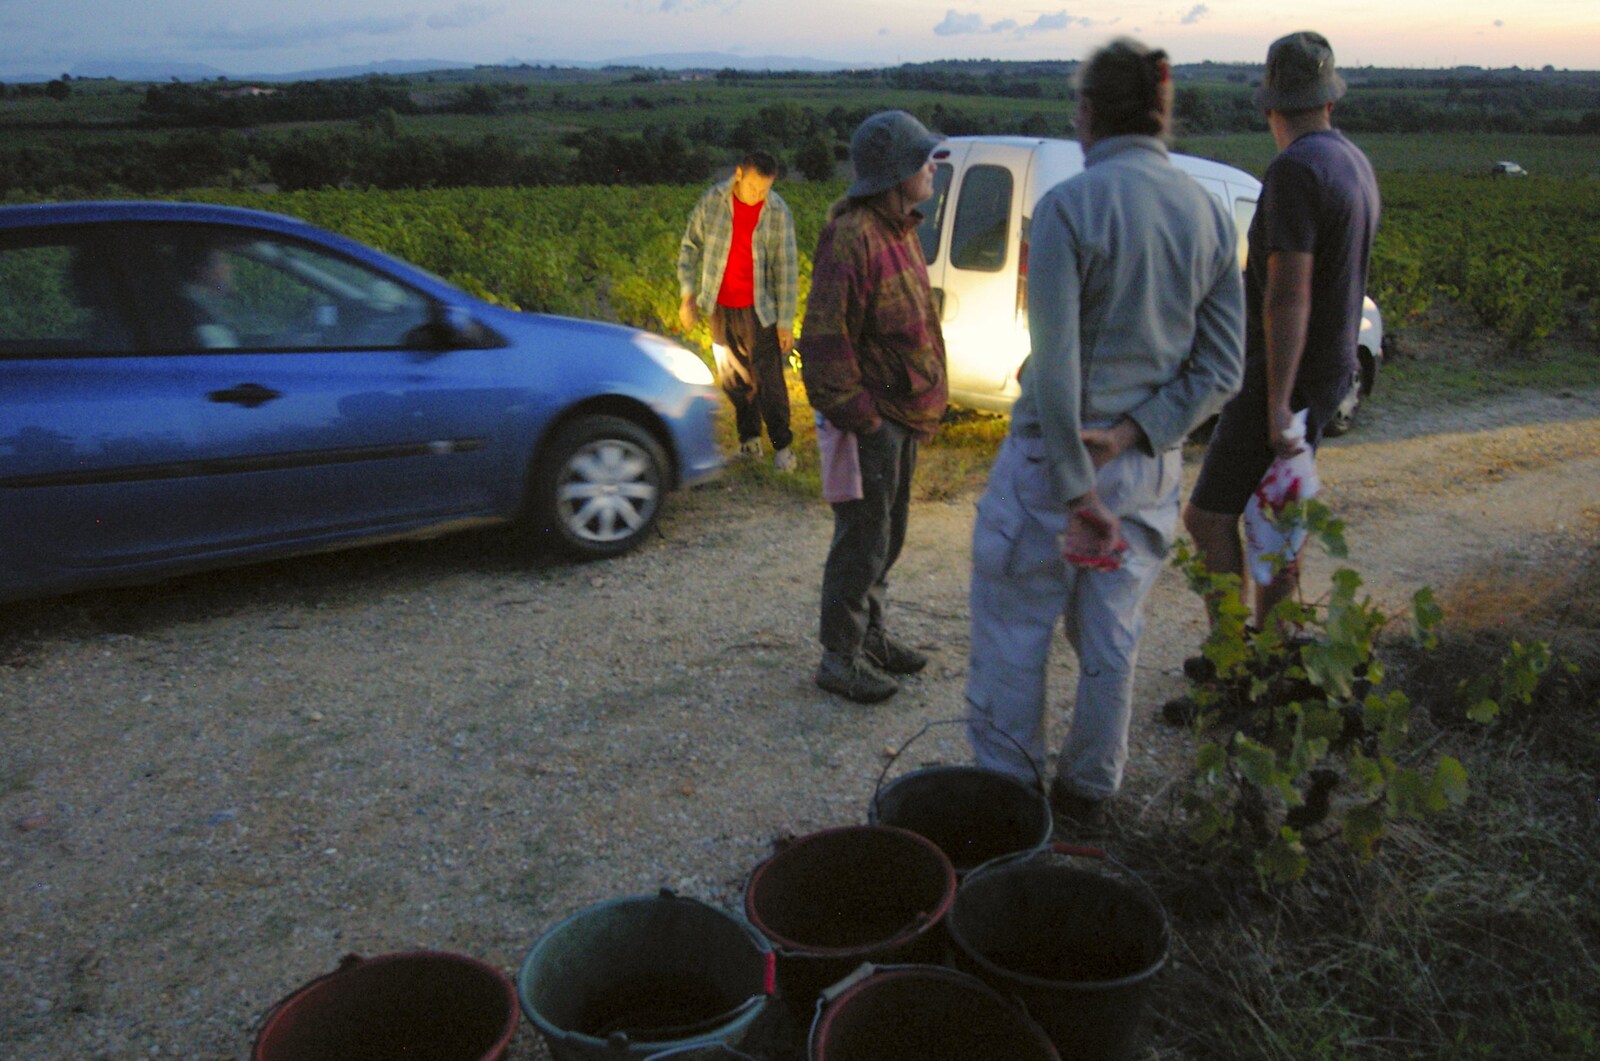 The grape pickers assemble at about 6.30am from Grape Picking and Pressing, Roussillon, France - 19th September 2006